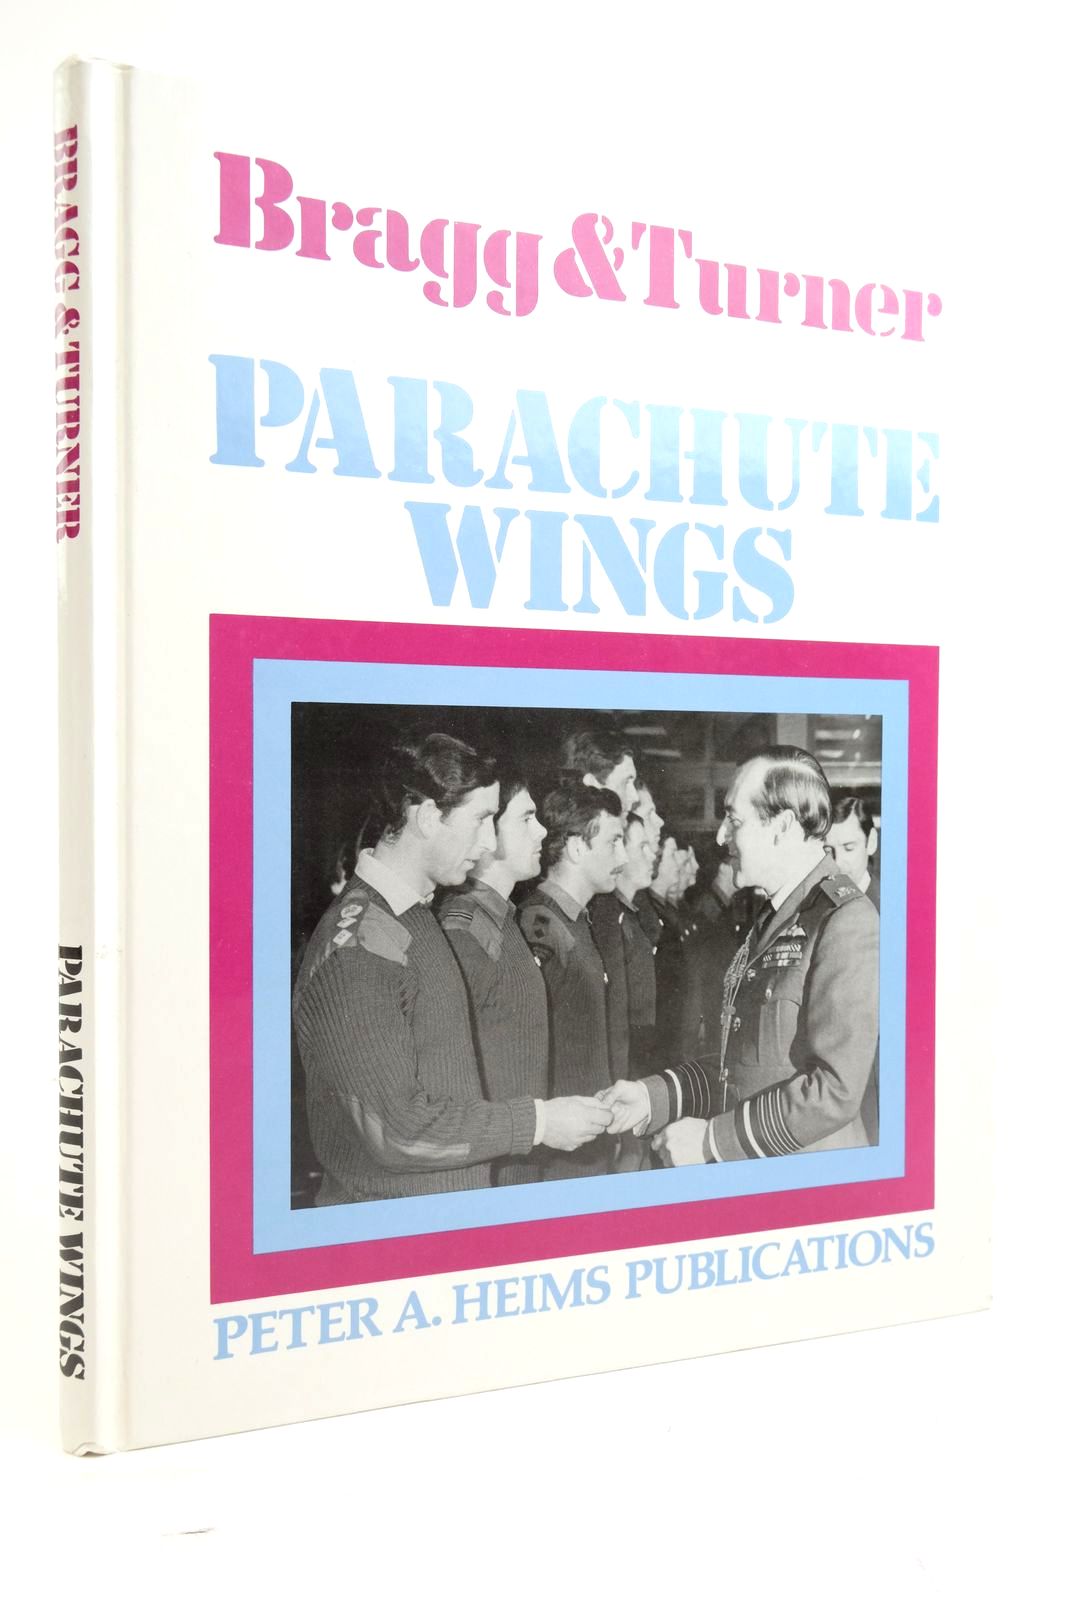 Photo of PARACHUTE WINGS written by Bragg, R.J. Turner, Roy published by Peter A. Heims Limited (STOCK CODE: 2136546)  for sale by Stella & Rose's Books